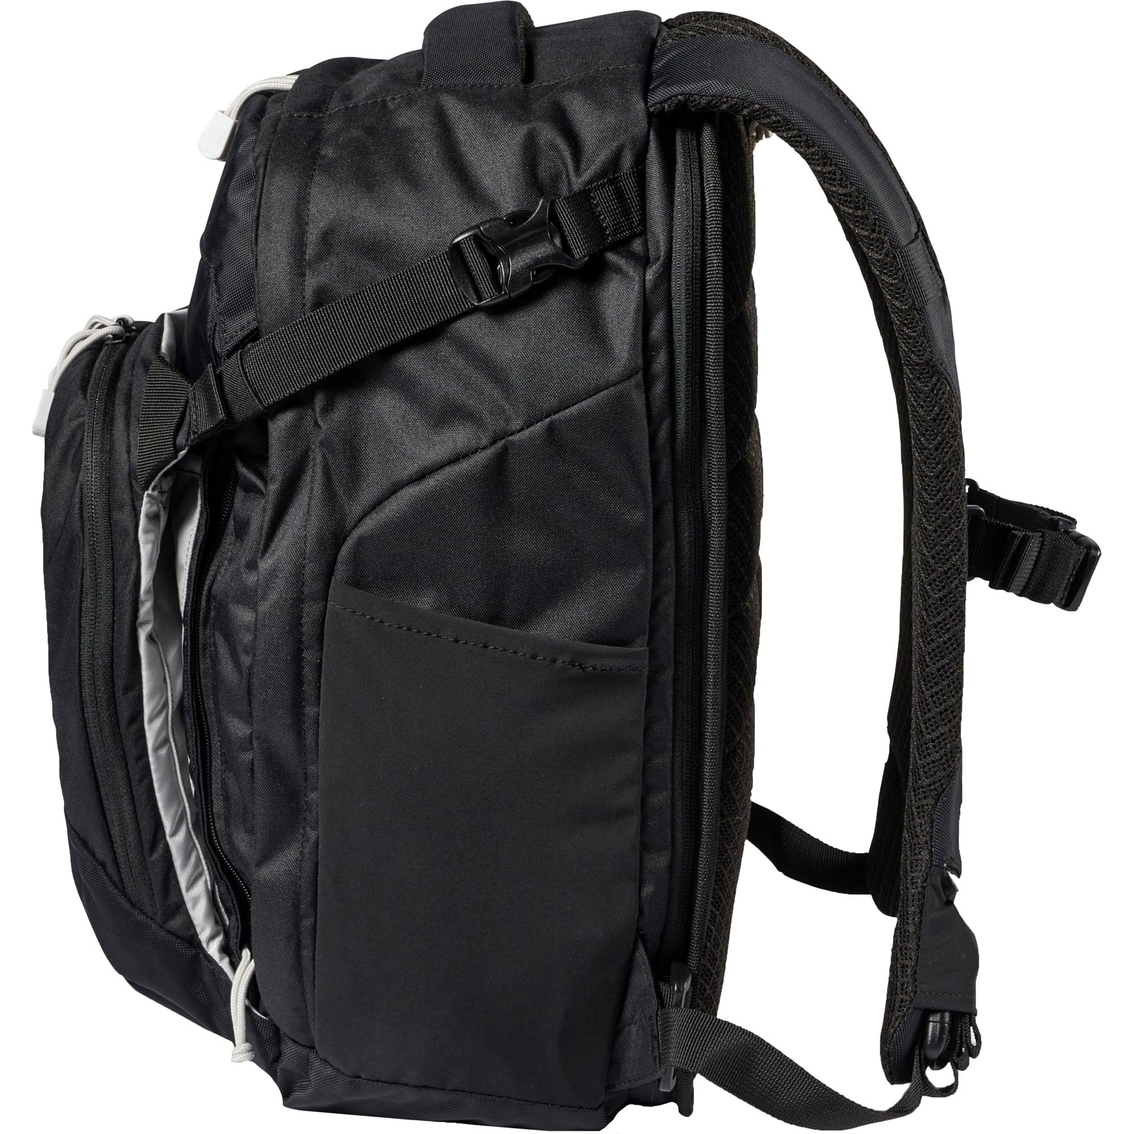 5.11 COVERT 18 2.0 Backpack - Image 6 of 10